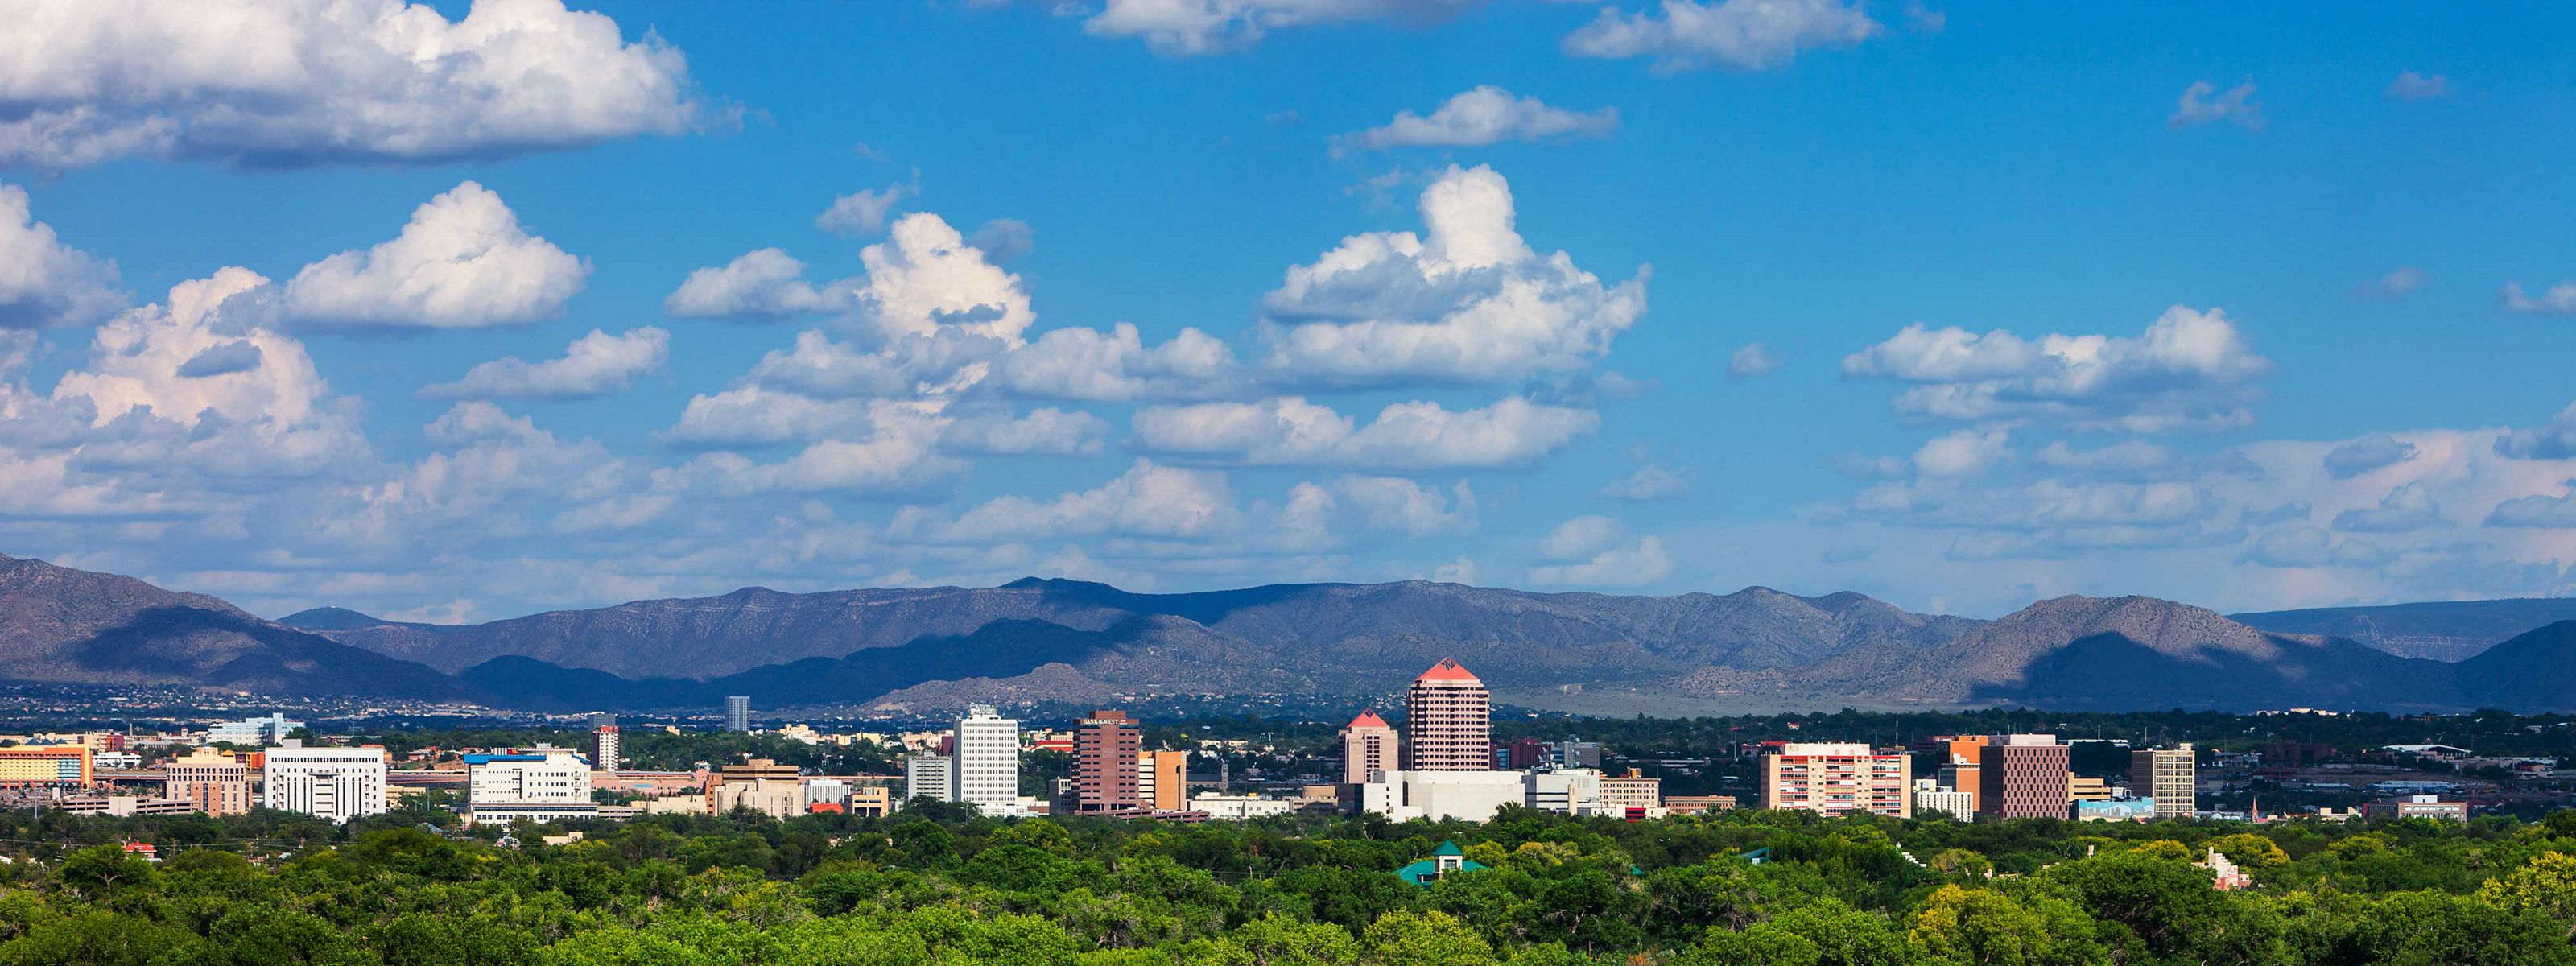 Aerial view from the Rio Grande in Albuquerque to the Sandia Mountains.